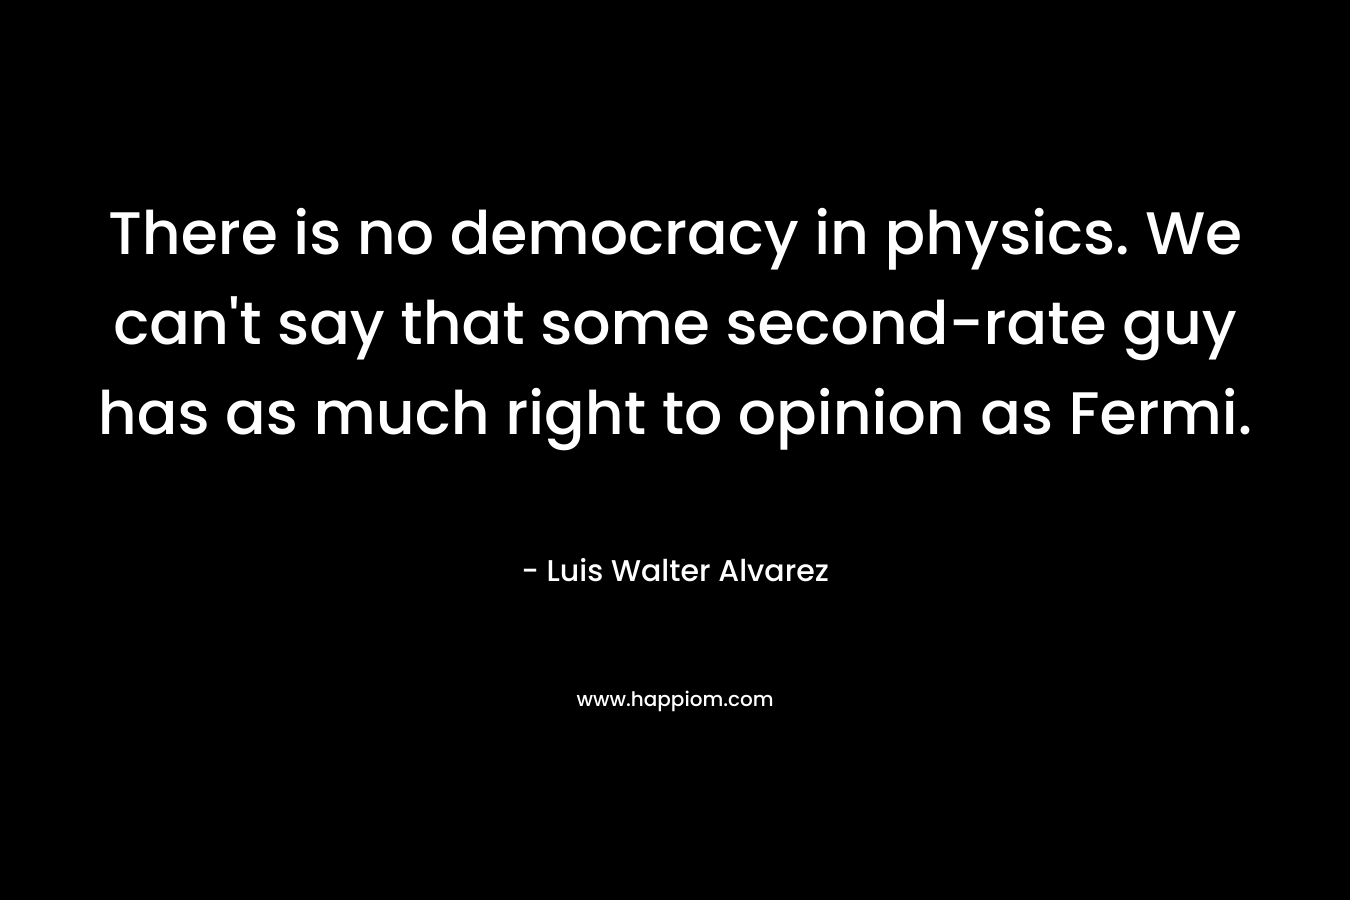 There is no democracy in physics. We can't say that some second-rate guy has as much right to opinion as Fermi.